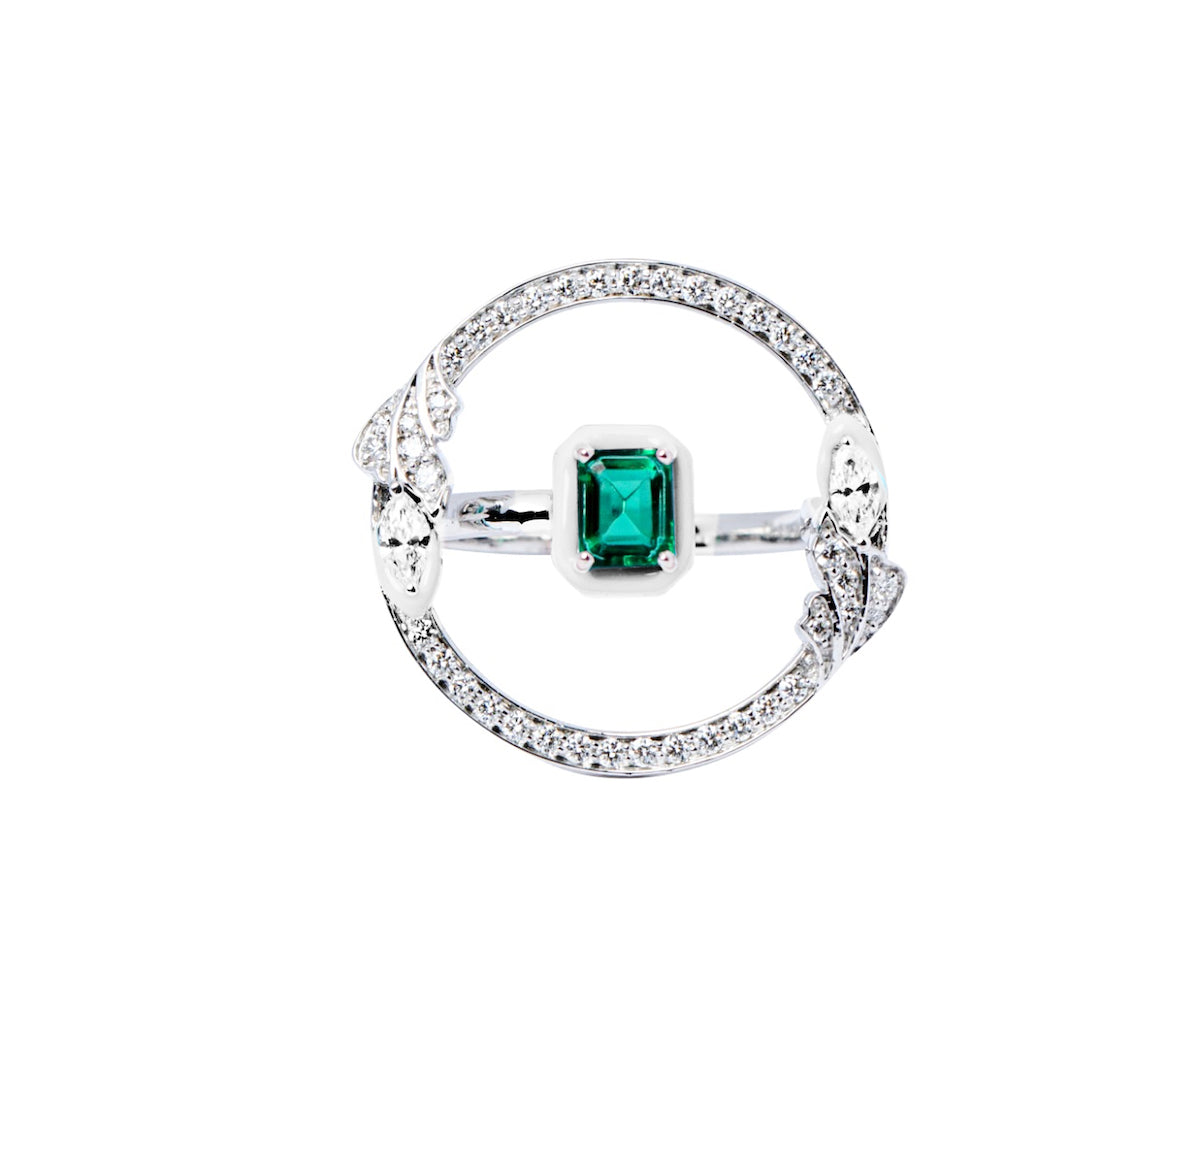 Halo Top 18k white gold, diamond and emerald ring